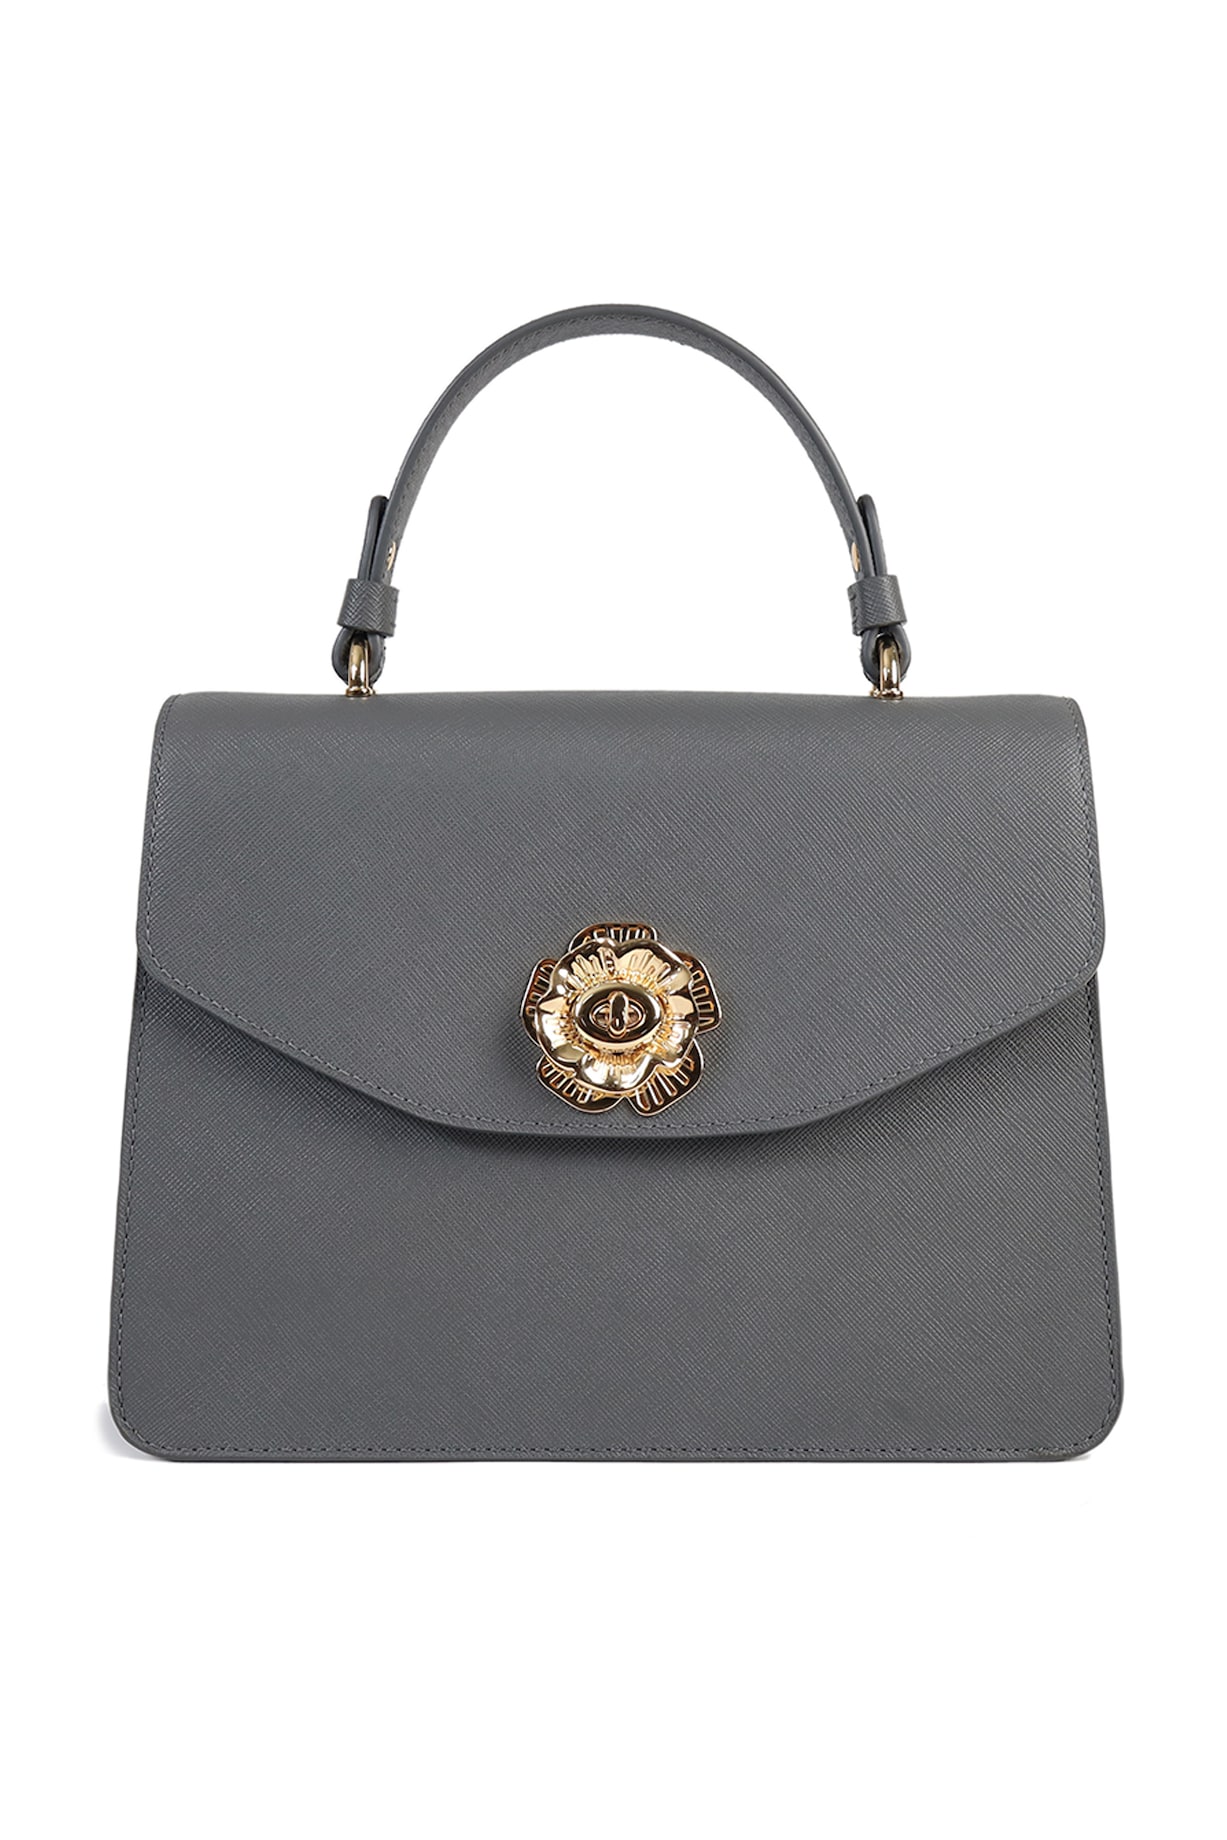 Women's Grey structured Leather Messenger Bag